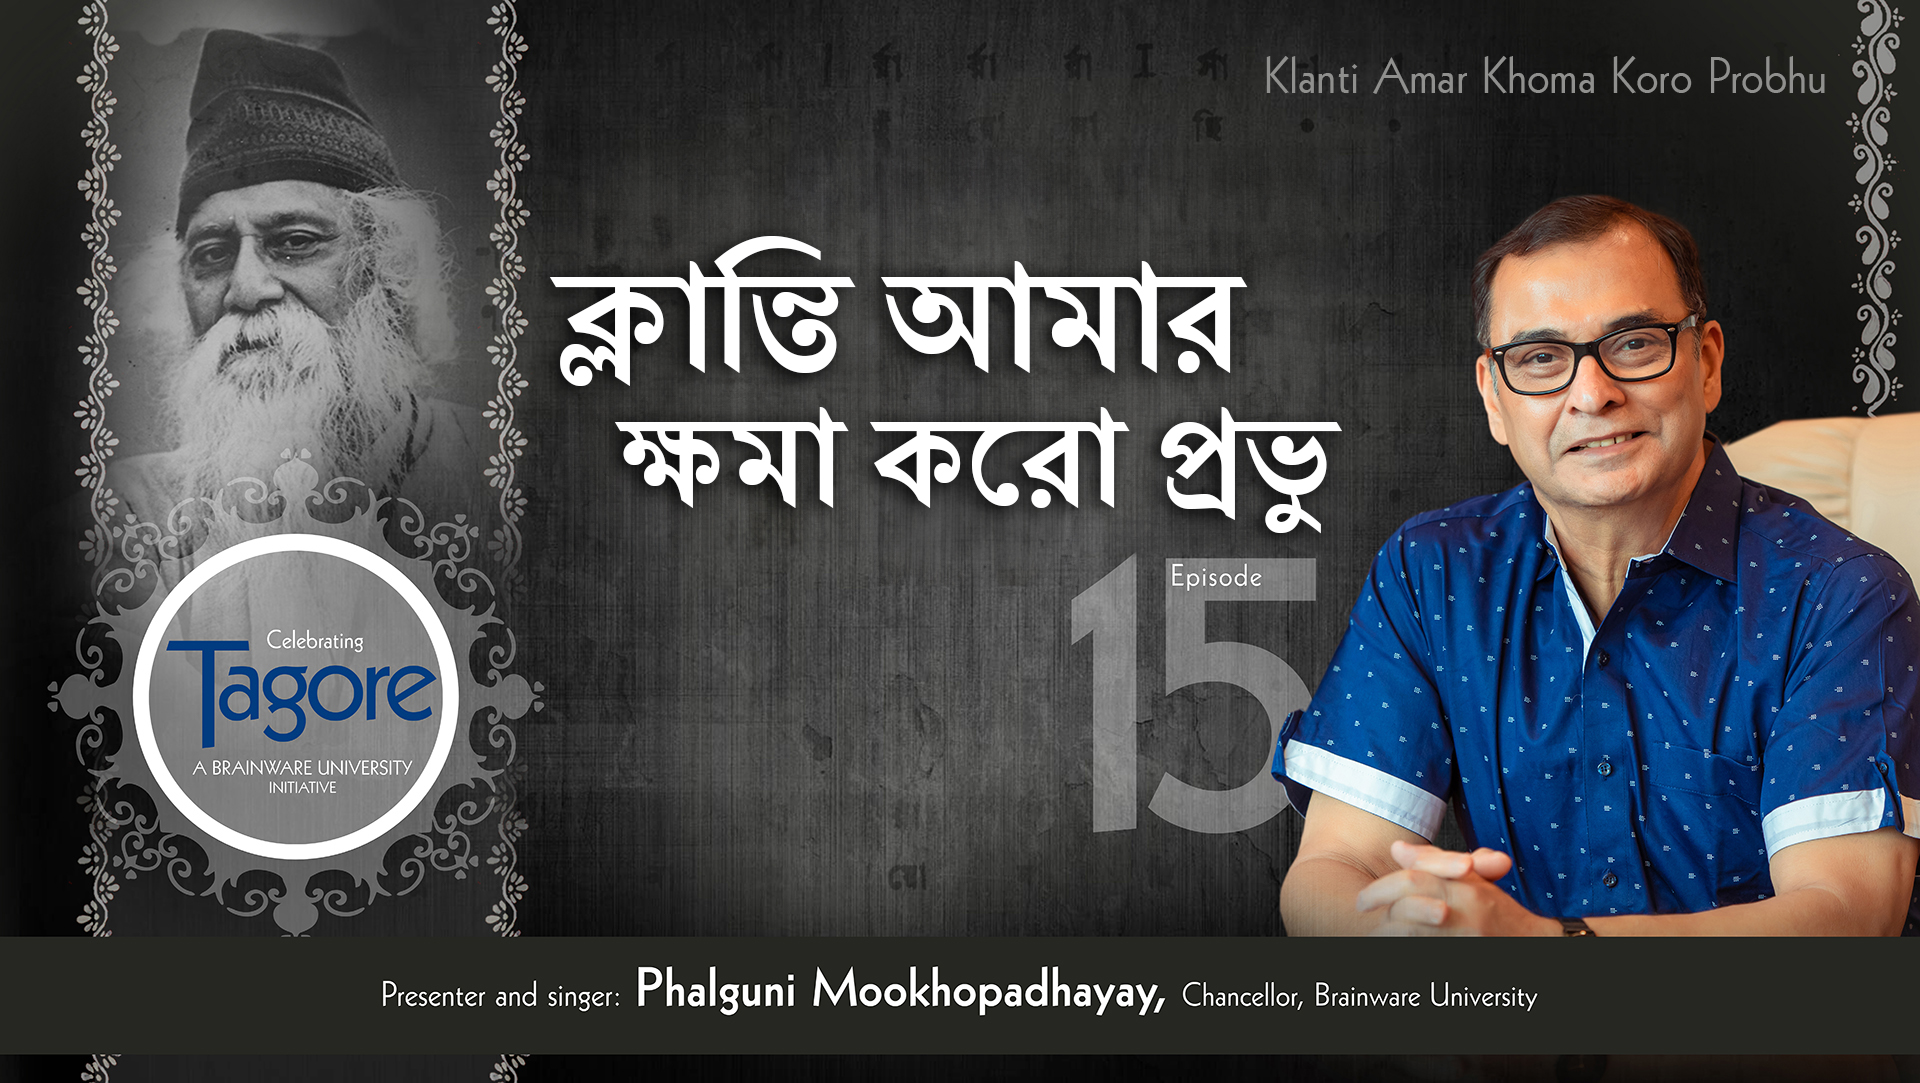 The image is a promotional banner for Episode 15 of "Celebrating Tagore," a Brainware University initiative featuring Phalguni Mookhopadhayay, Chancellor of Brainware University, as the presenter and singer. The episode focuses on "Klanti Amar Khoma Koro Probhu," a renowned Rabindra Sangeet. An image of Rabindranath Tagore is on the left, framed in an ornate design, with Bengali text highlighting the episode